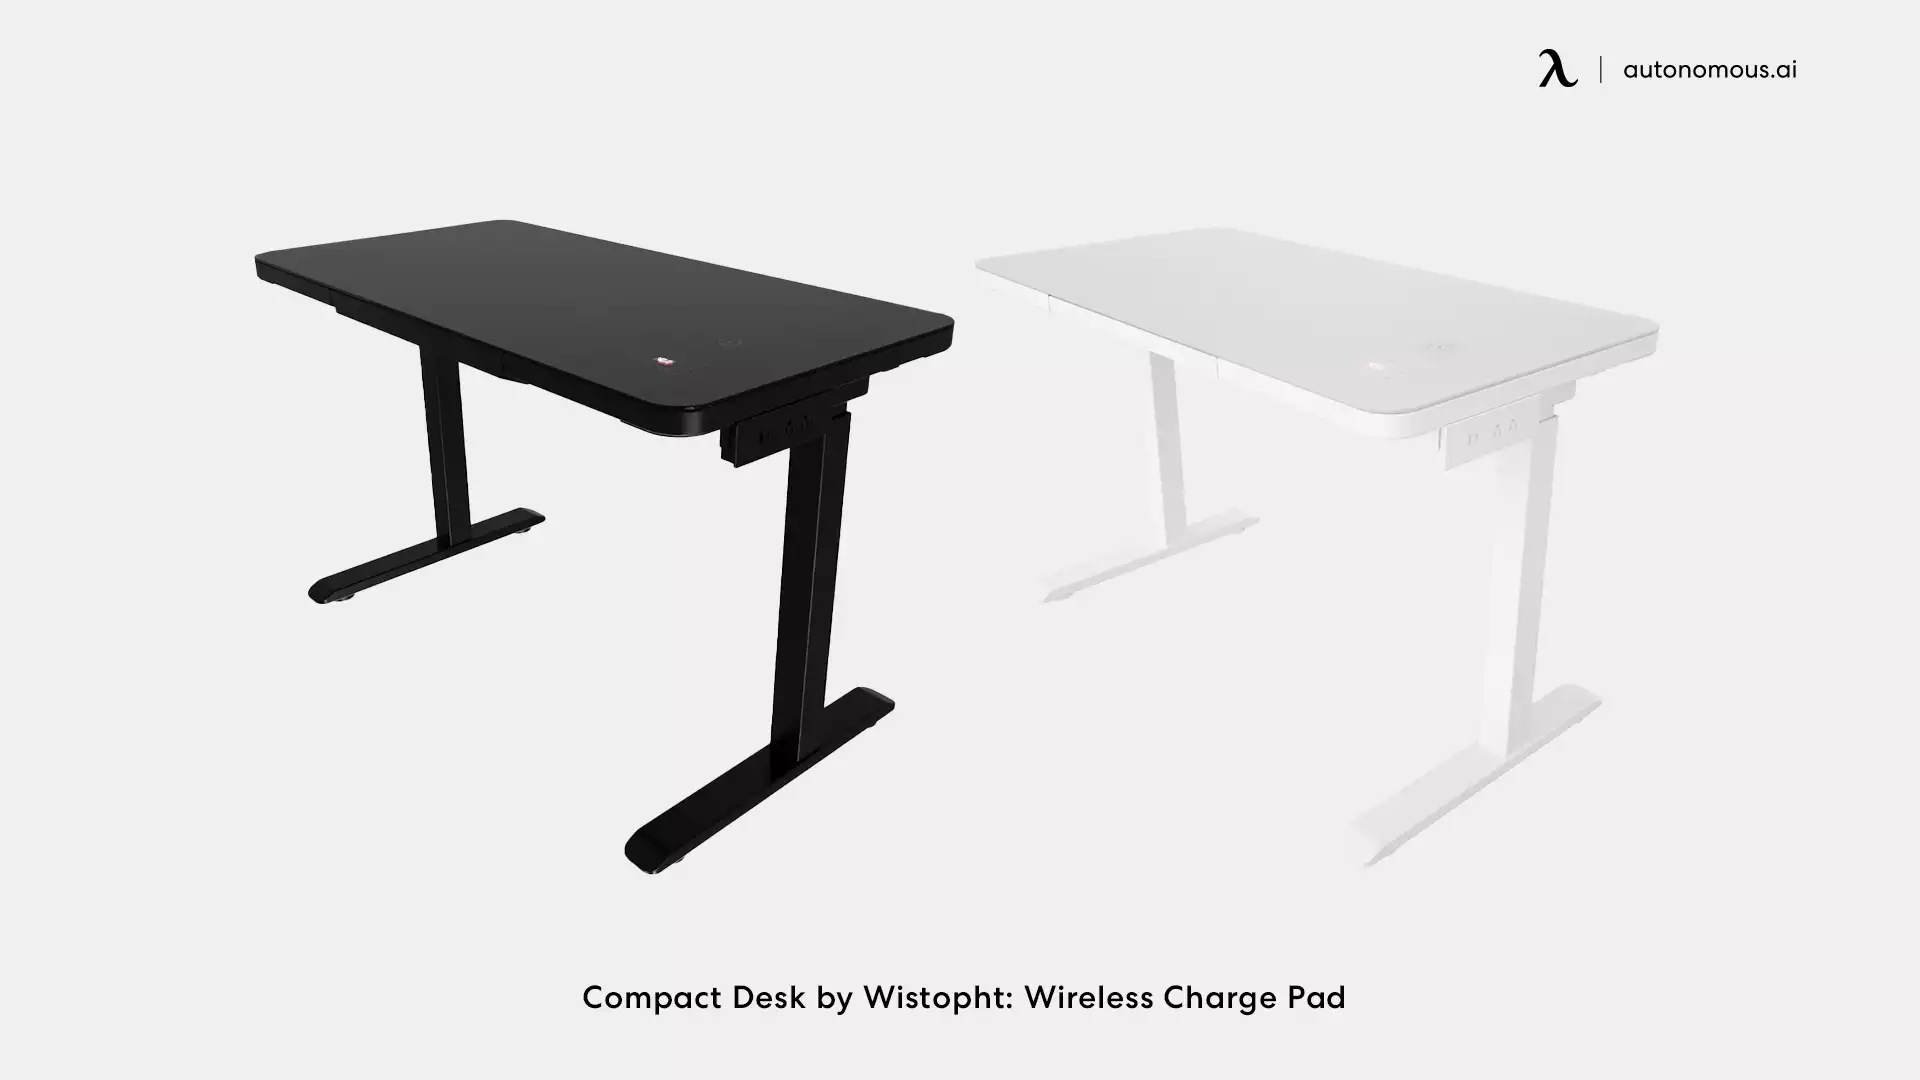 Wistohpt CompactDesk: Touchscreen Control & Wireless Charge Pad